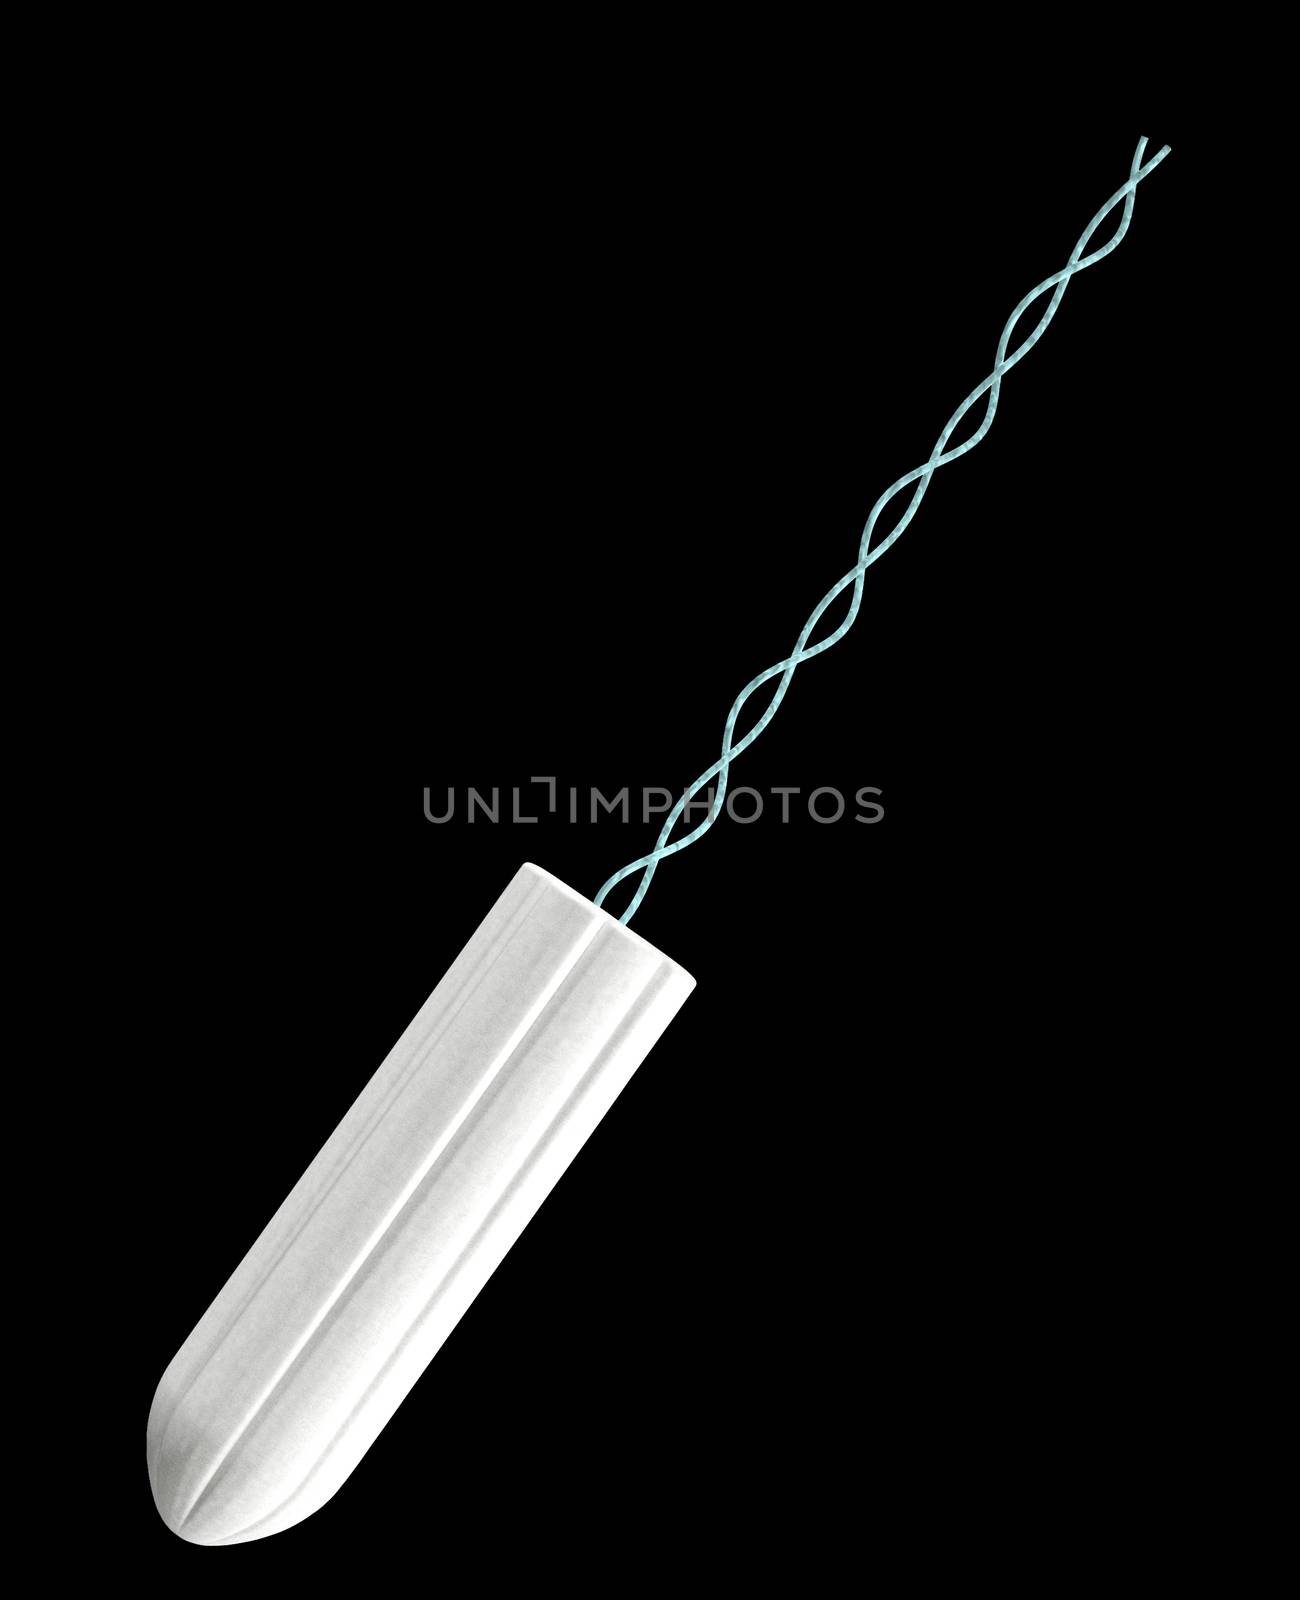 a 3D render of a tampong with string on black background